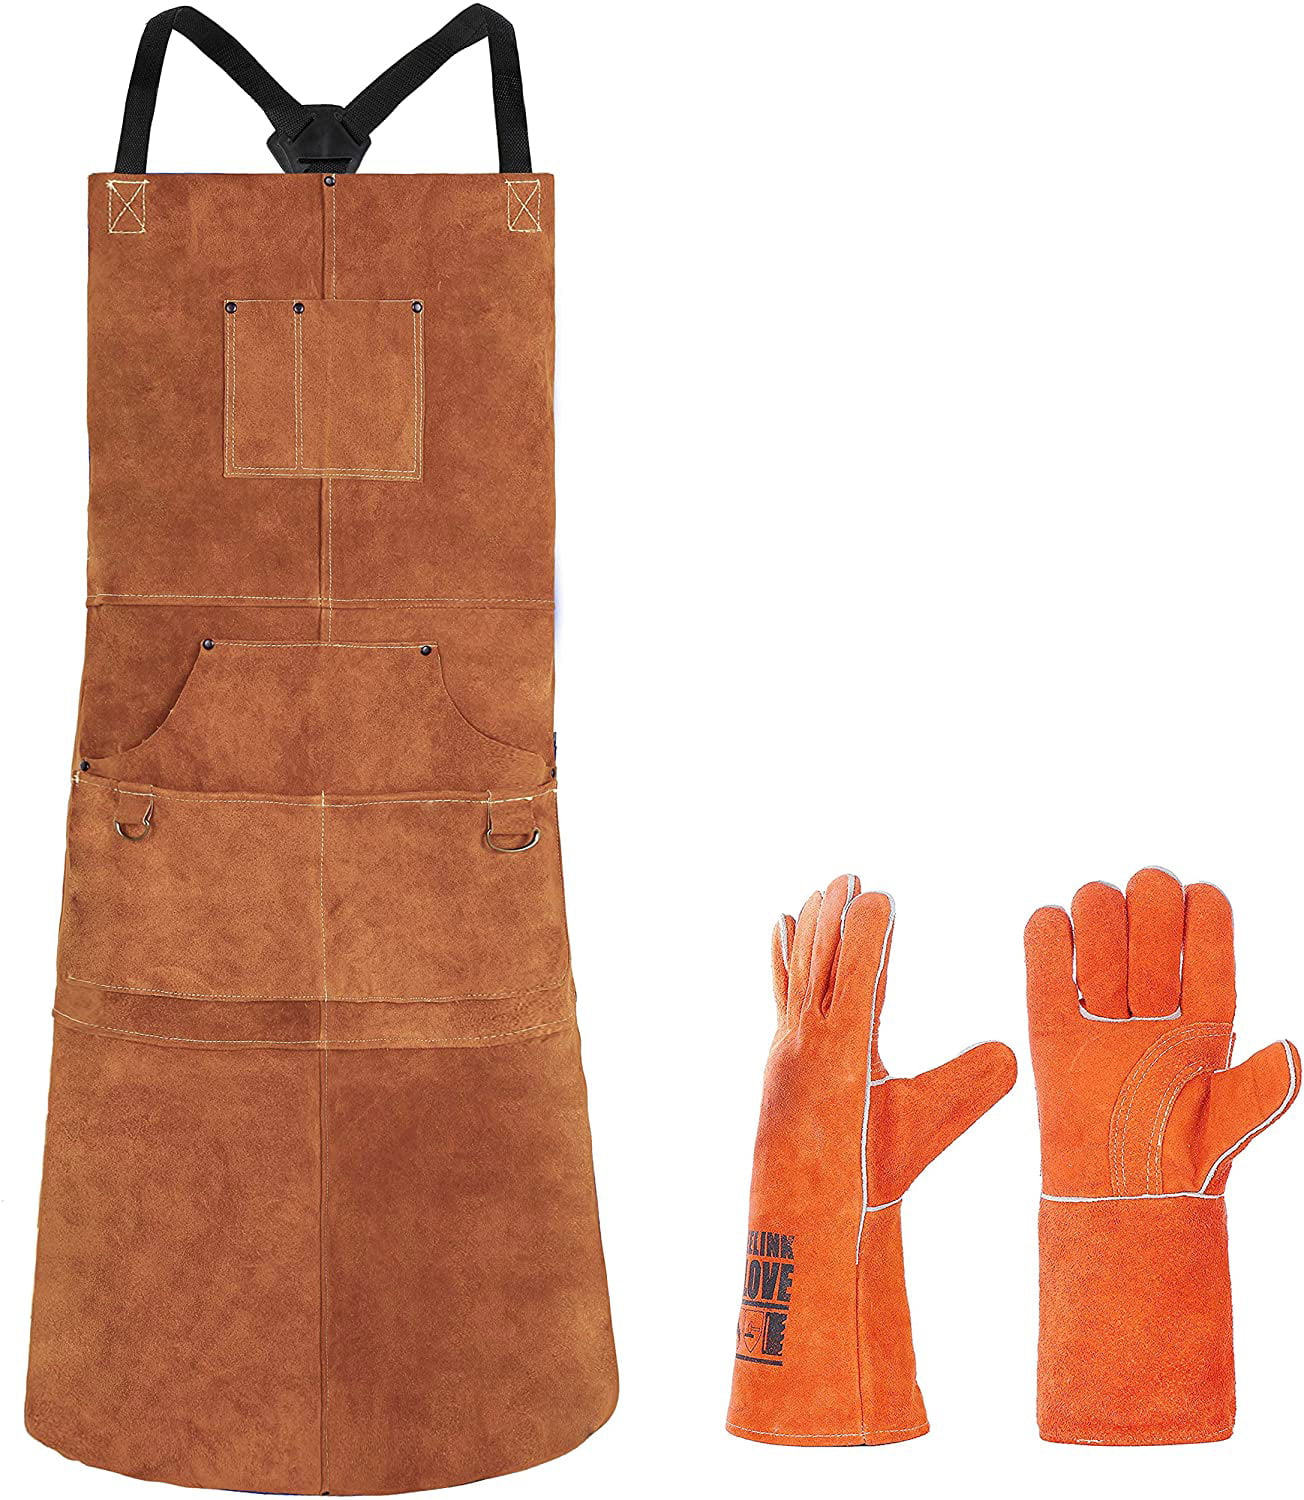 Adjustable M to XXL for Men & Women Heat & Flame Resistant Heavy Duty Welding Apron Leather Work Shop Apron with 6 Tool Pockets 24 x 36 